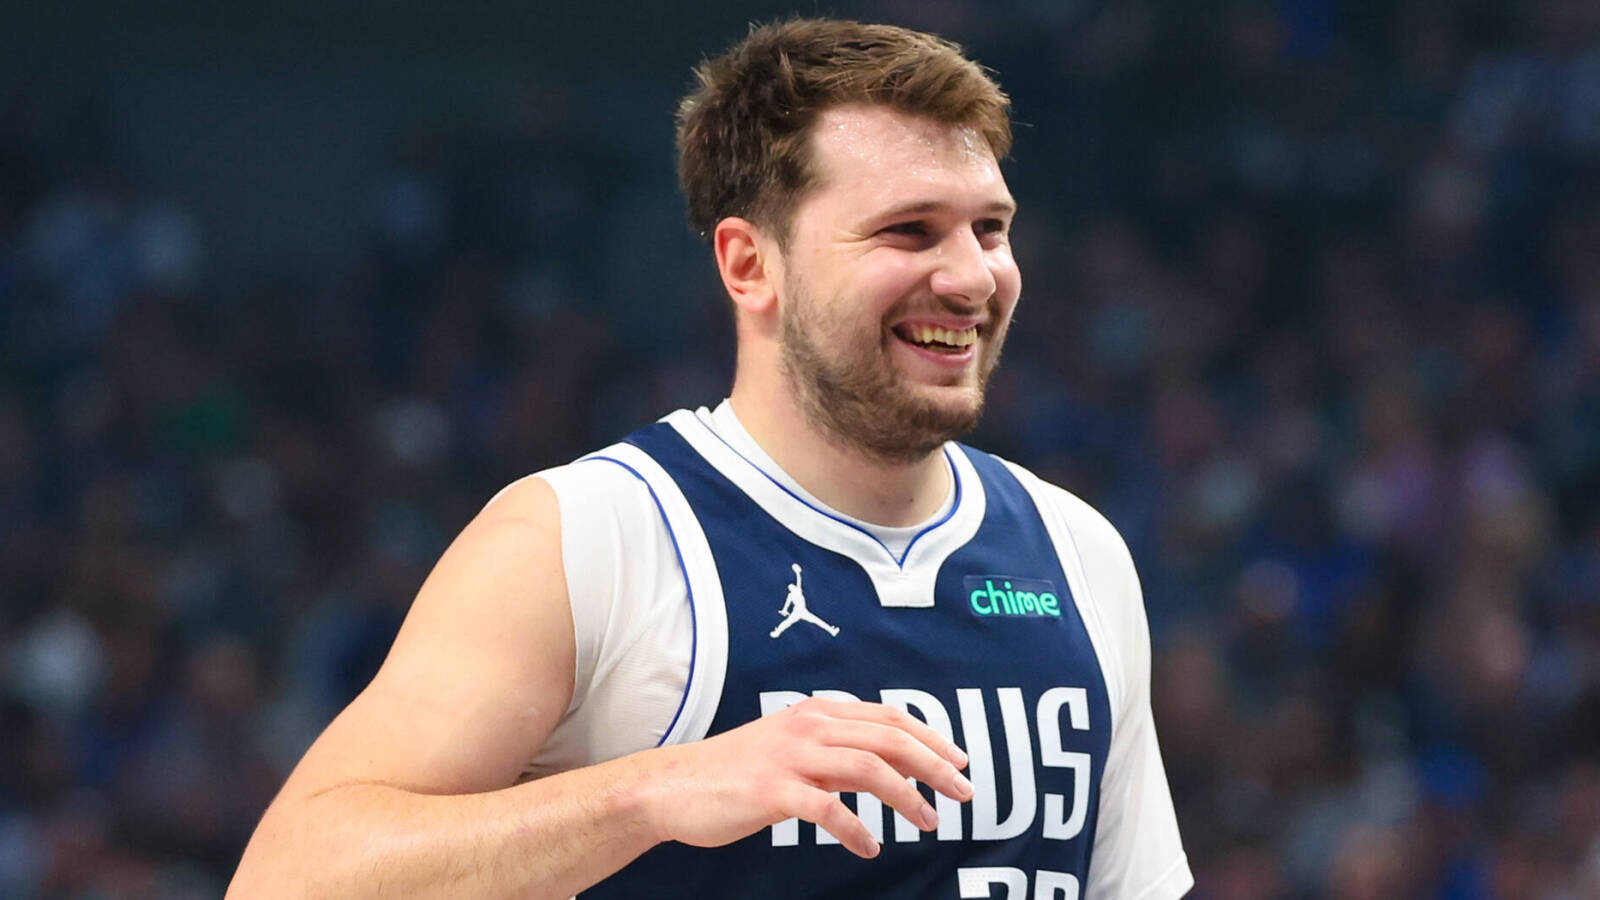 Mavericks' Luka Doncic gets payback, knocks out Clippers